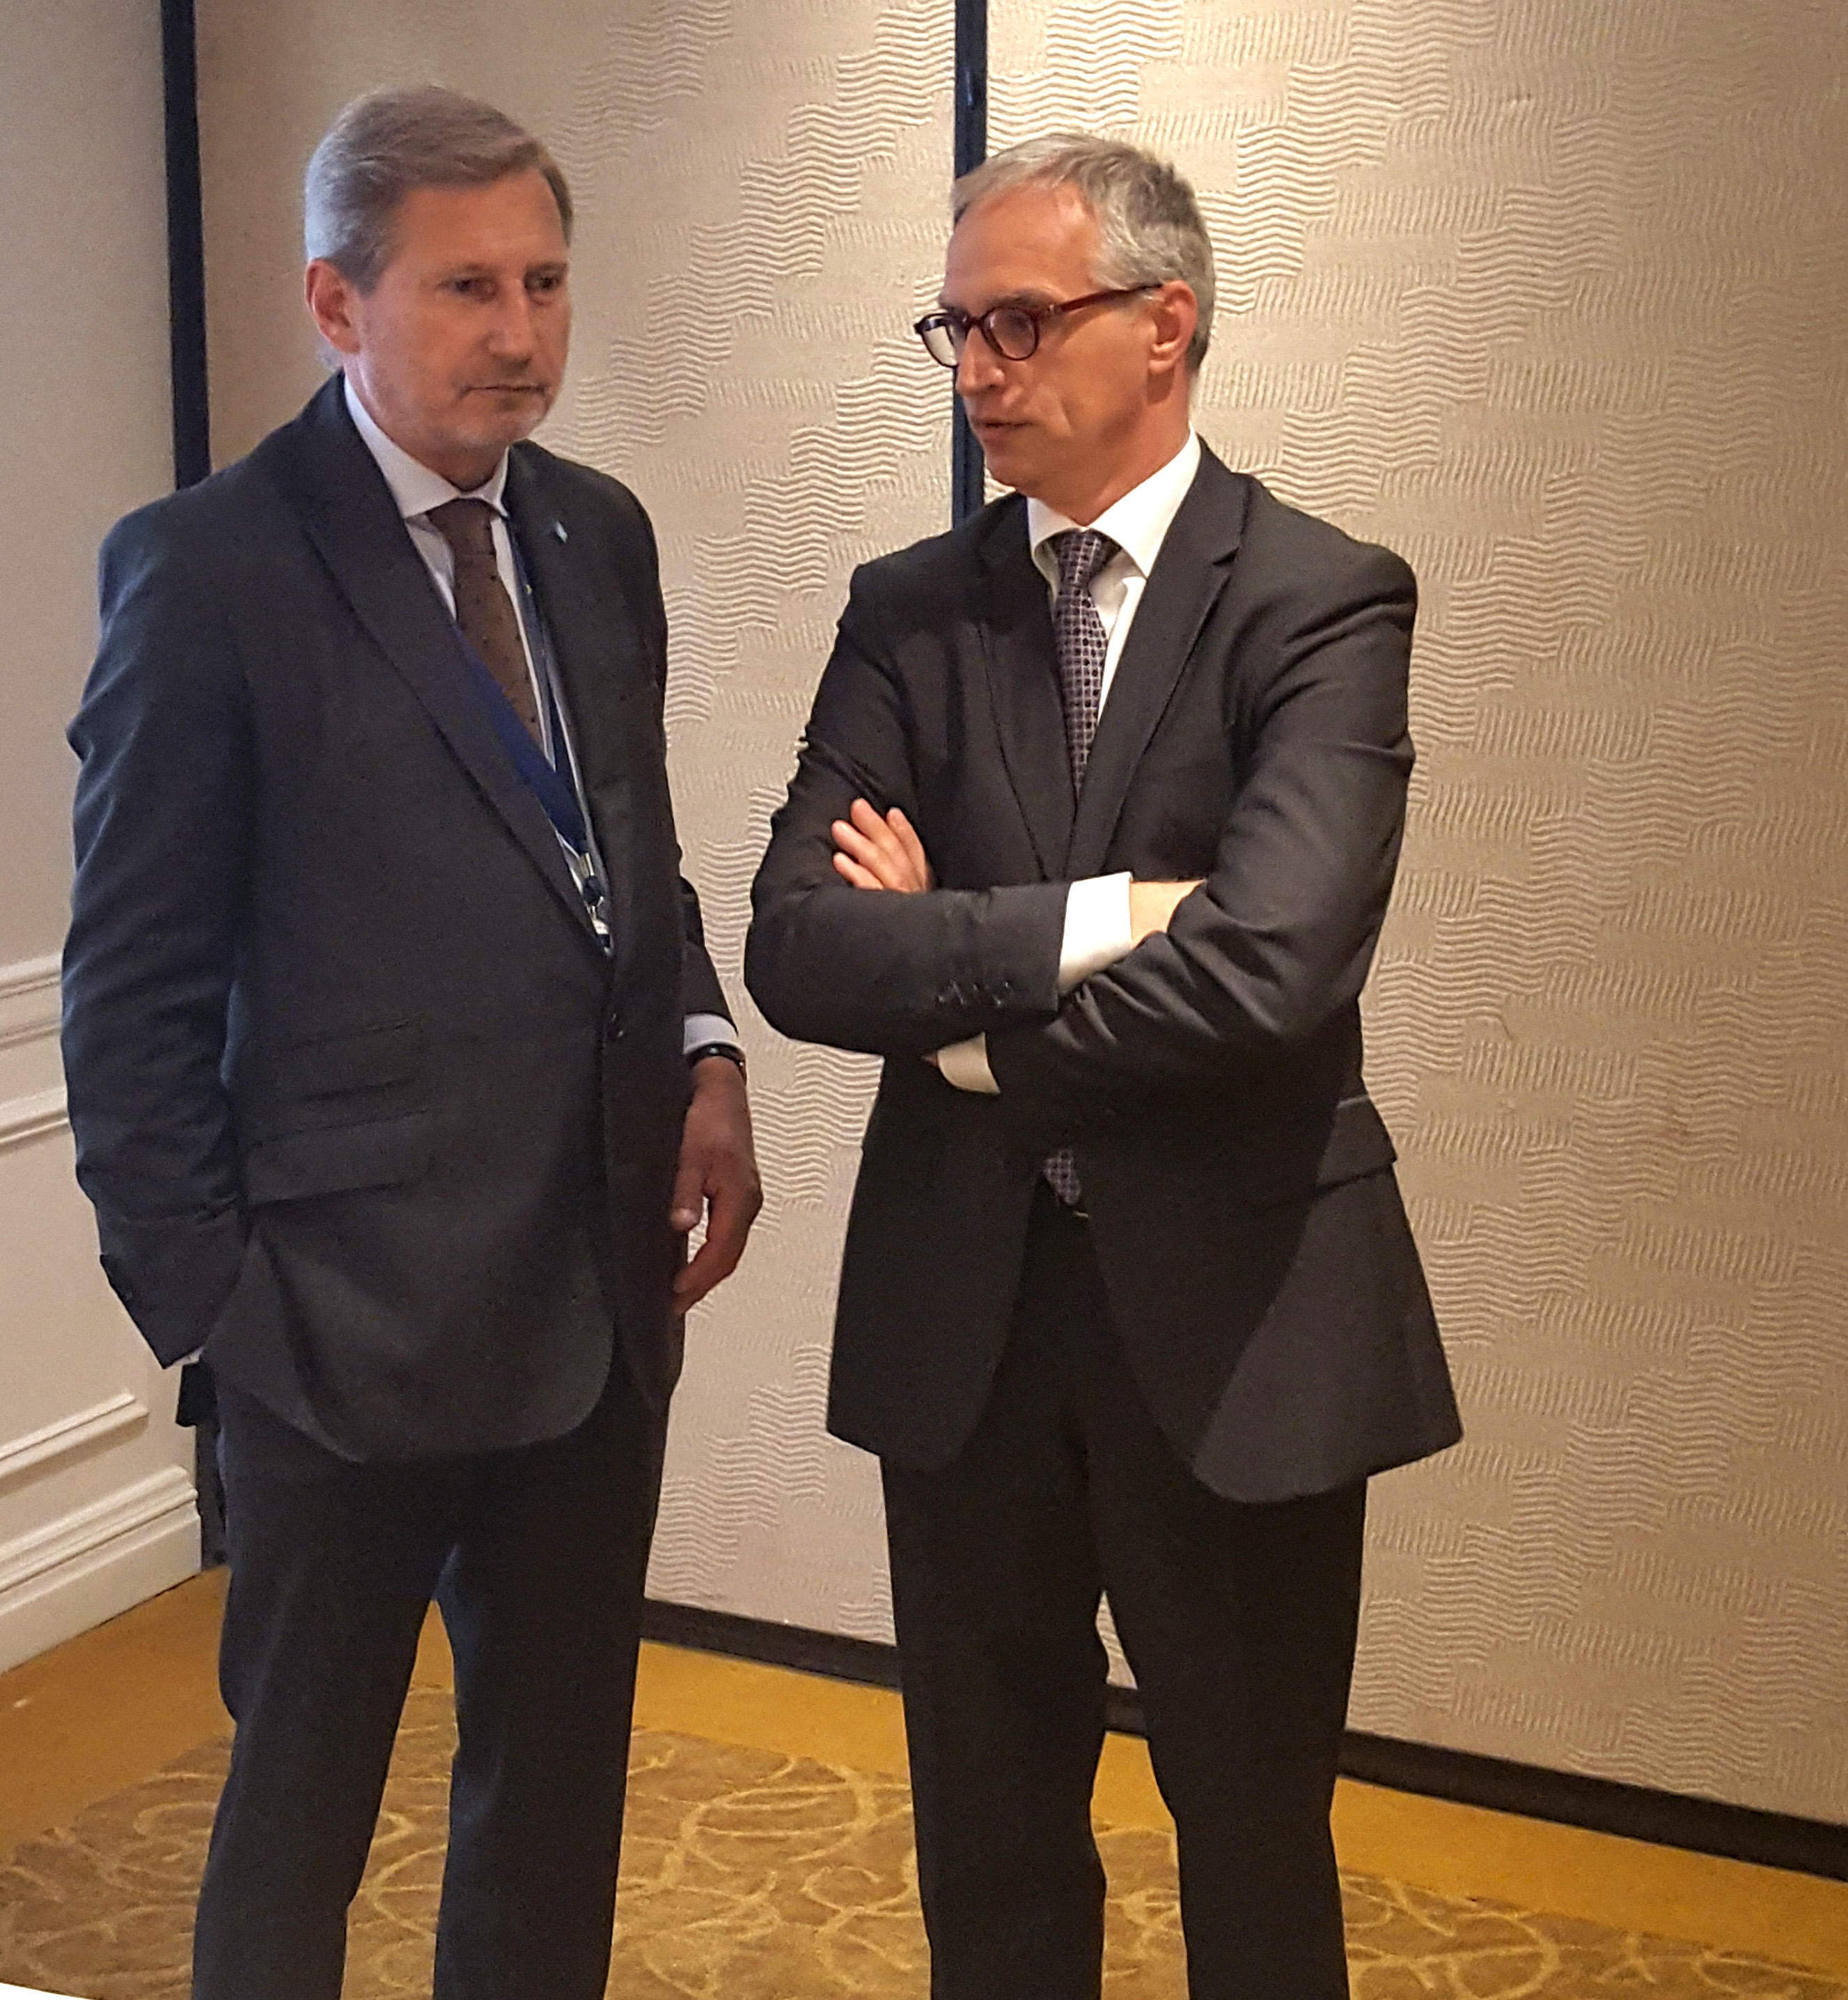 RCC Secretary General Goran Svilanovic (right) and EU Commissioner for Enlargement and European Neighbourhood Policy Johannes Hahn, at the RCC-hosted informal meeting of the Western Balkans six foreign ministers, held on 20 September 2017 in New York. (Photo: RCC/Natasa Mitrovic)